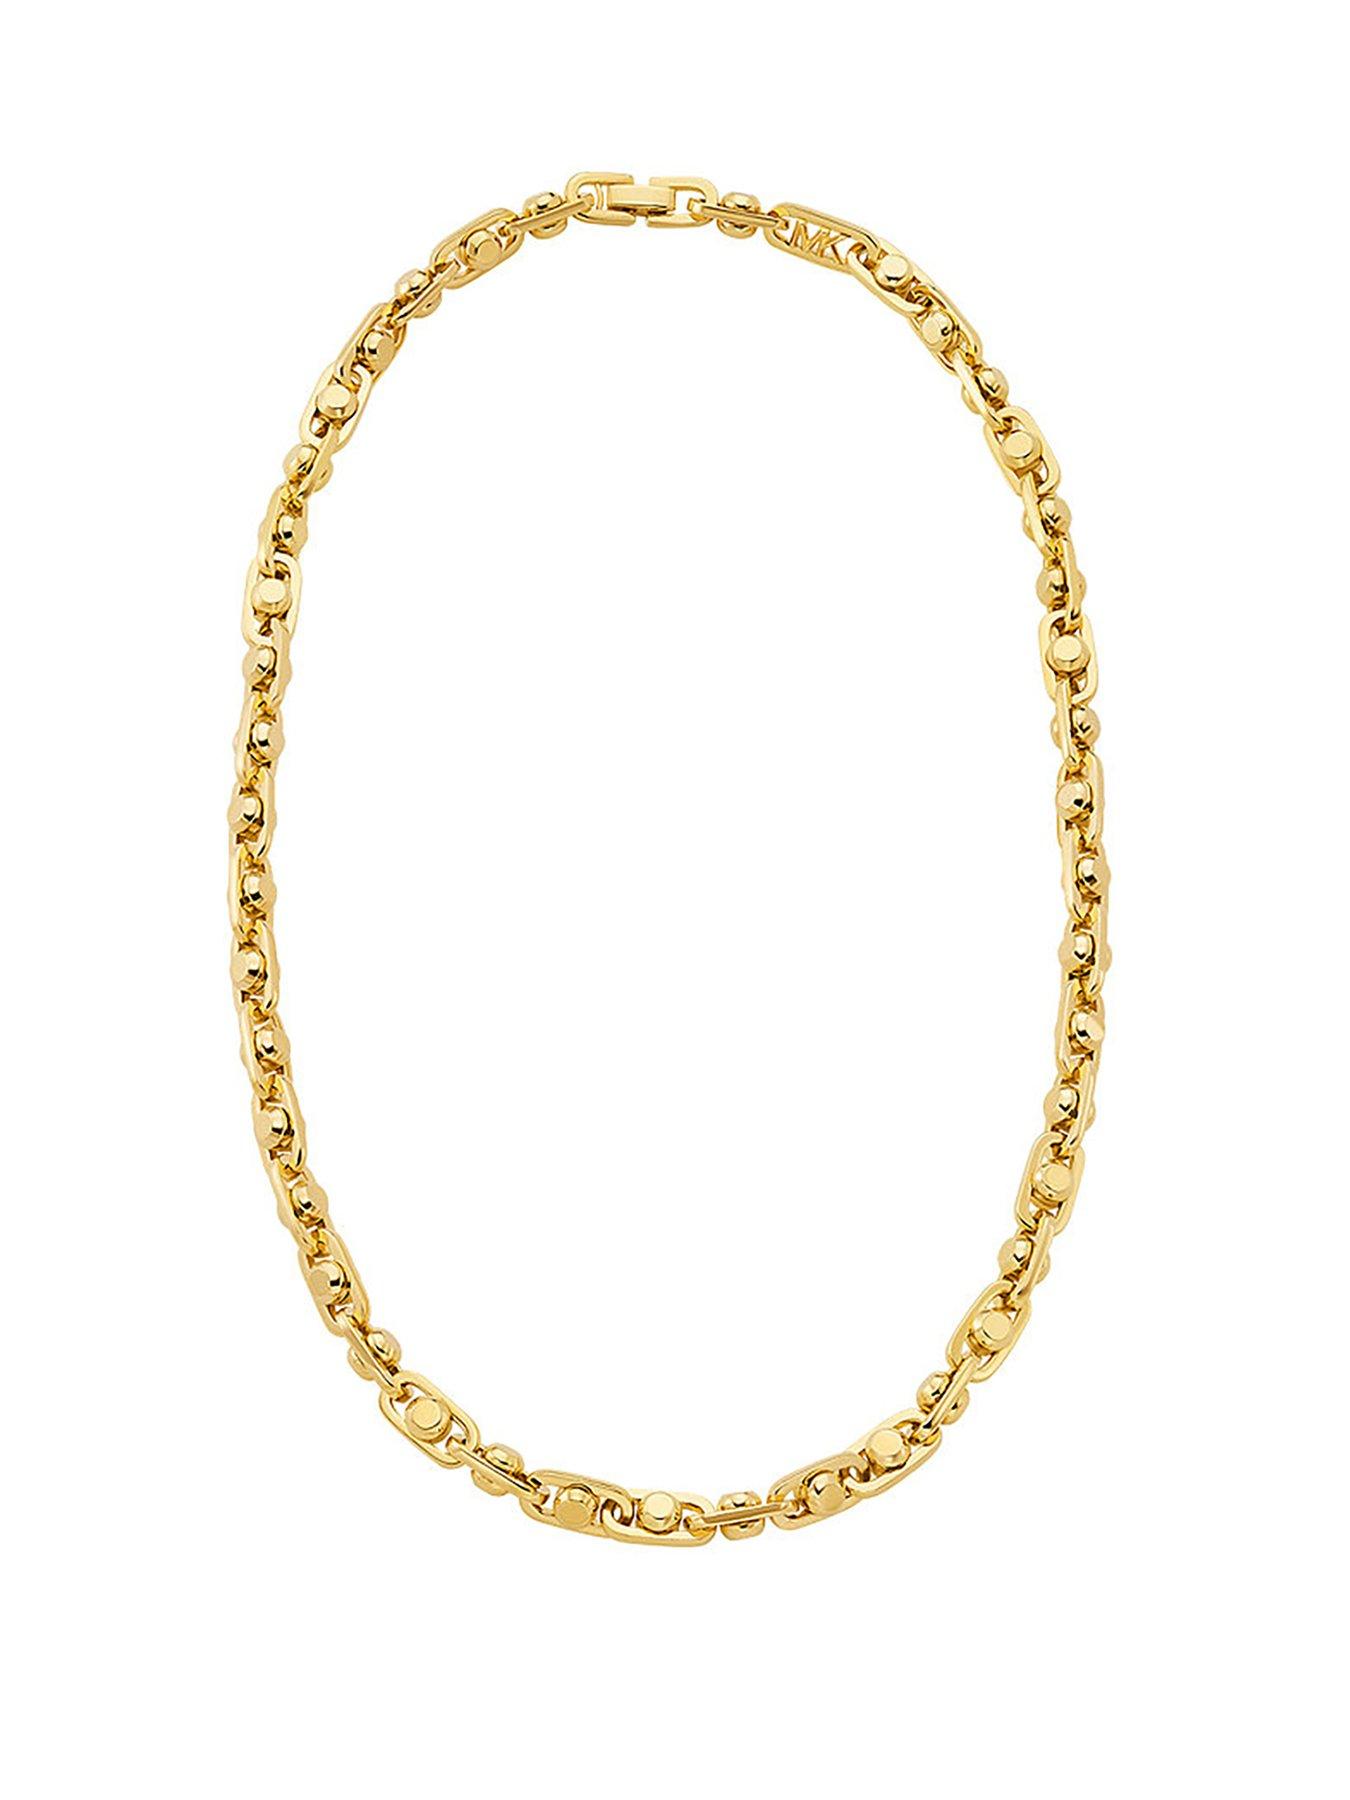 BAUBLEBAR Double Layer Paperclip Y-Chain | Chain, Baublebar, Paper clip